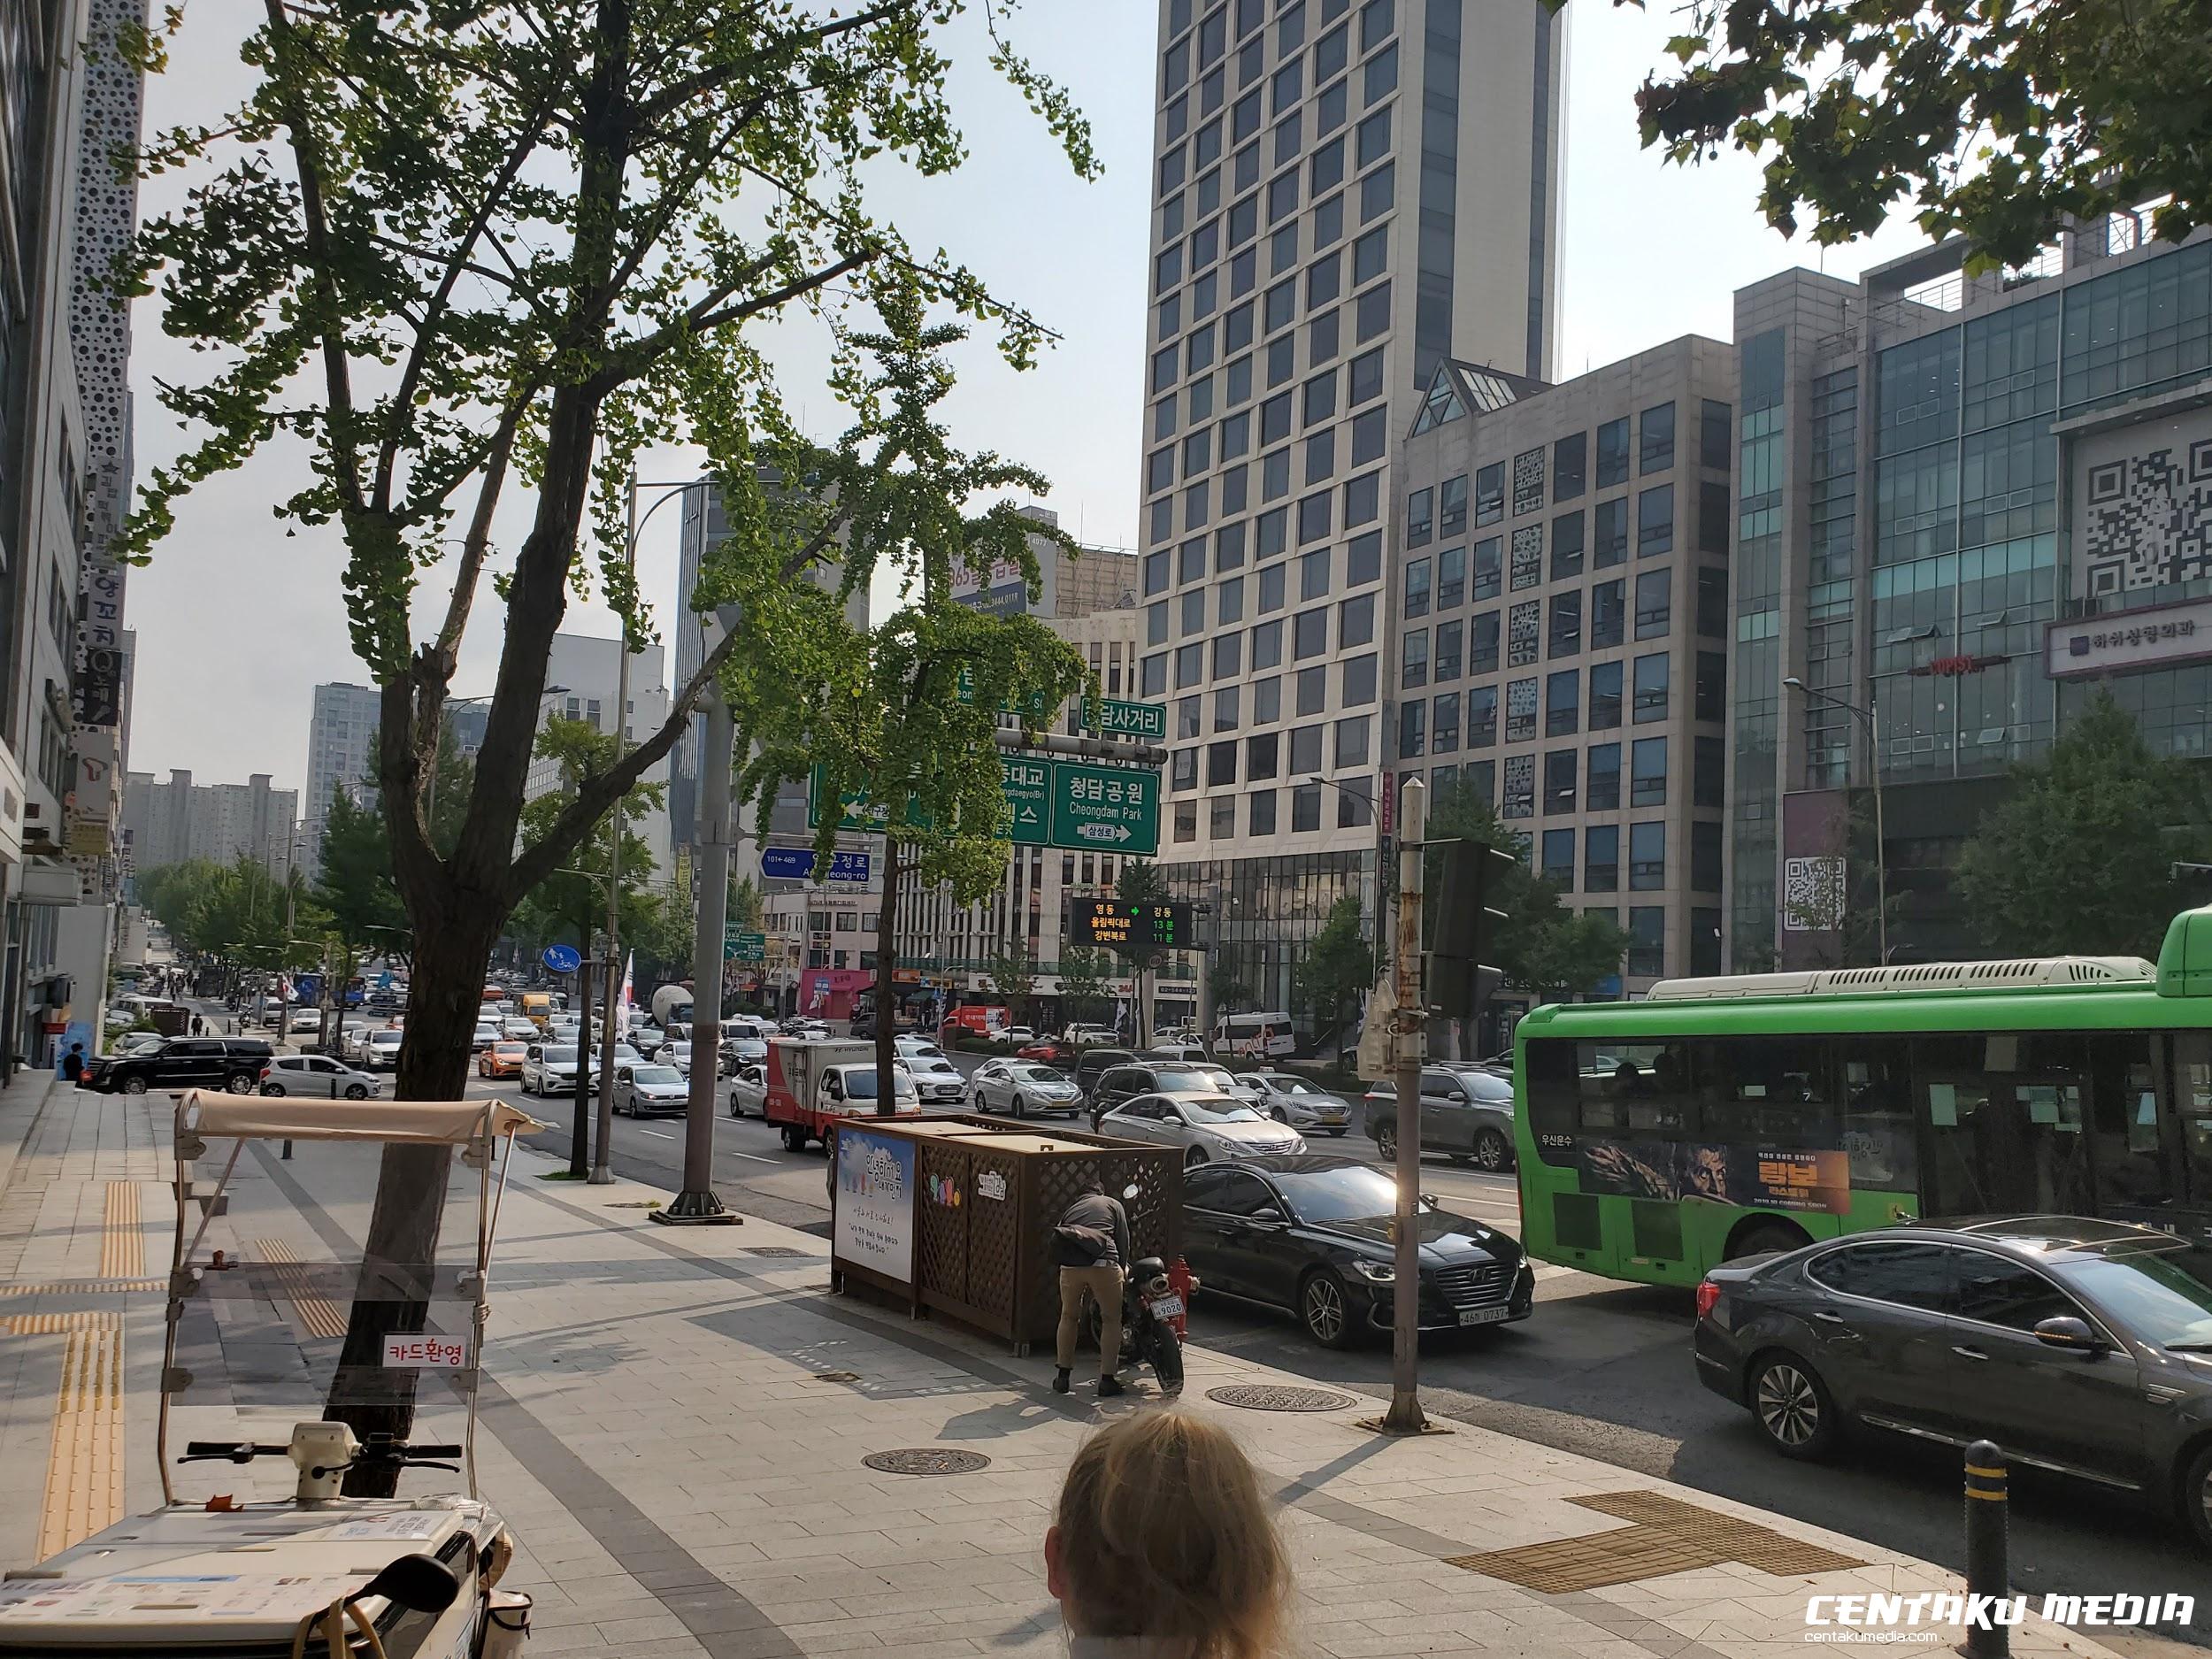 Cars and bus fill the streets in the Gangnam area.